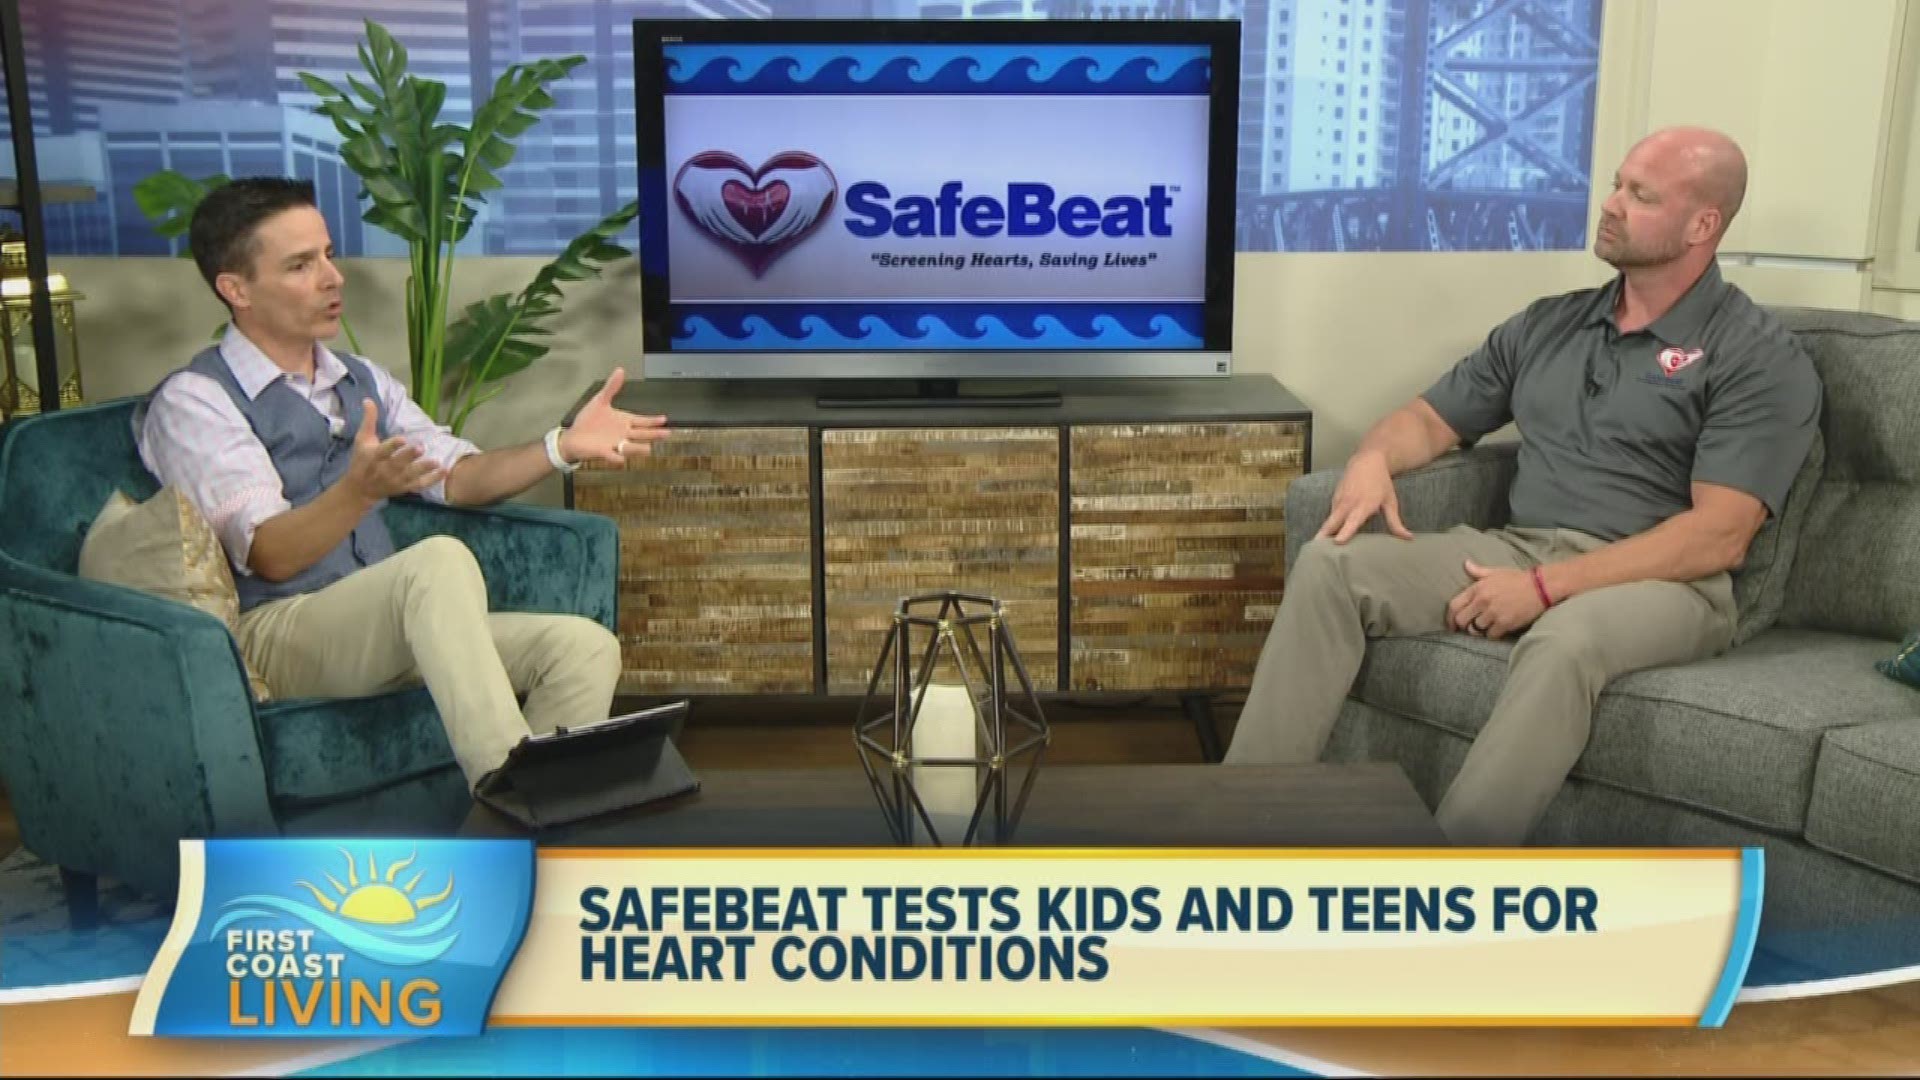 Thousands of kids and teens have heart conditions and don't even know it.